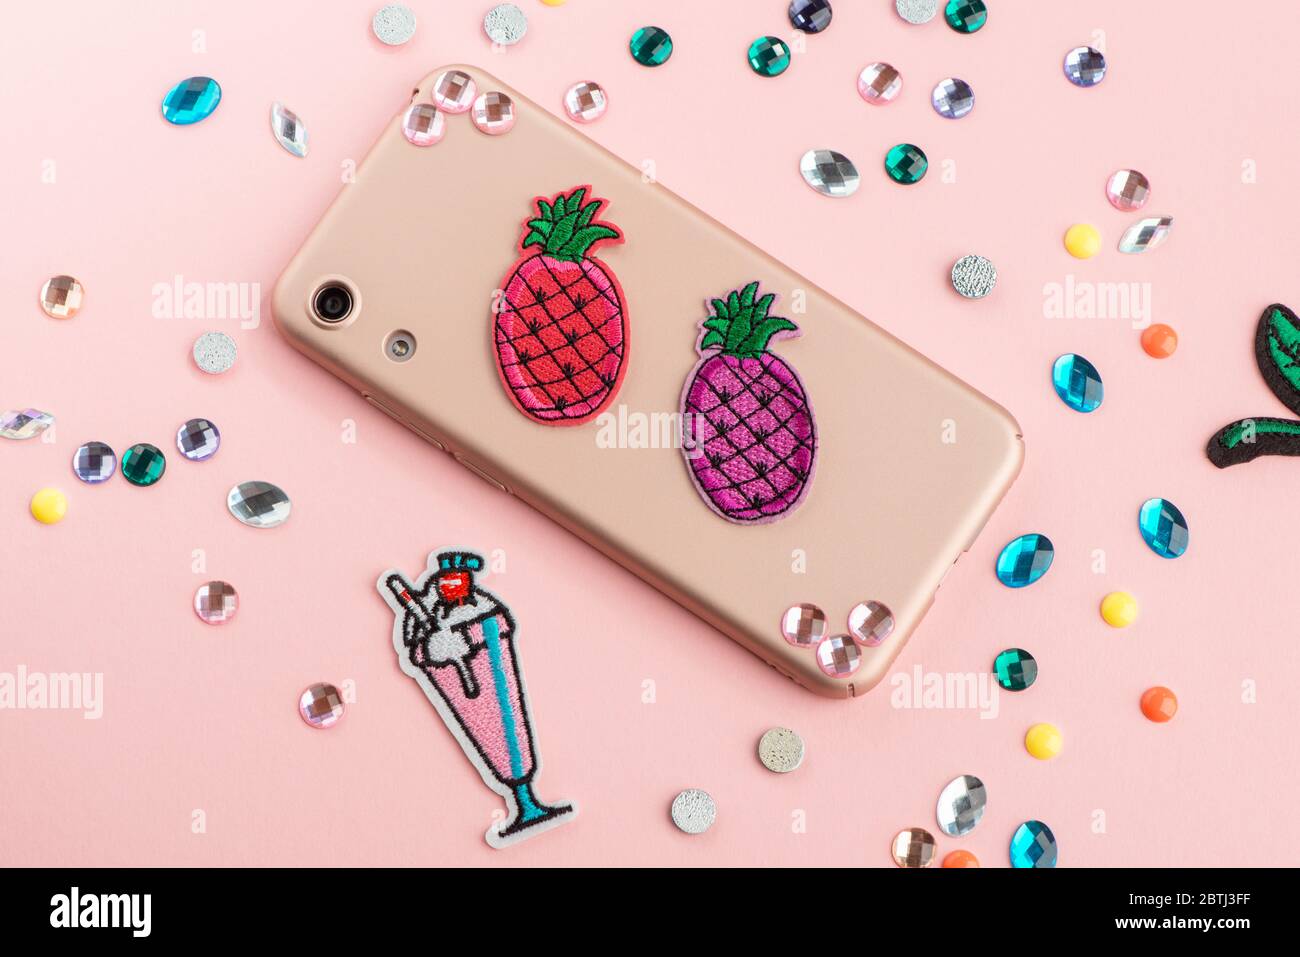 Colorful pineapple patches and rhinestones on beige phone case Stock Photo